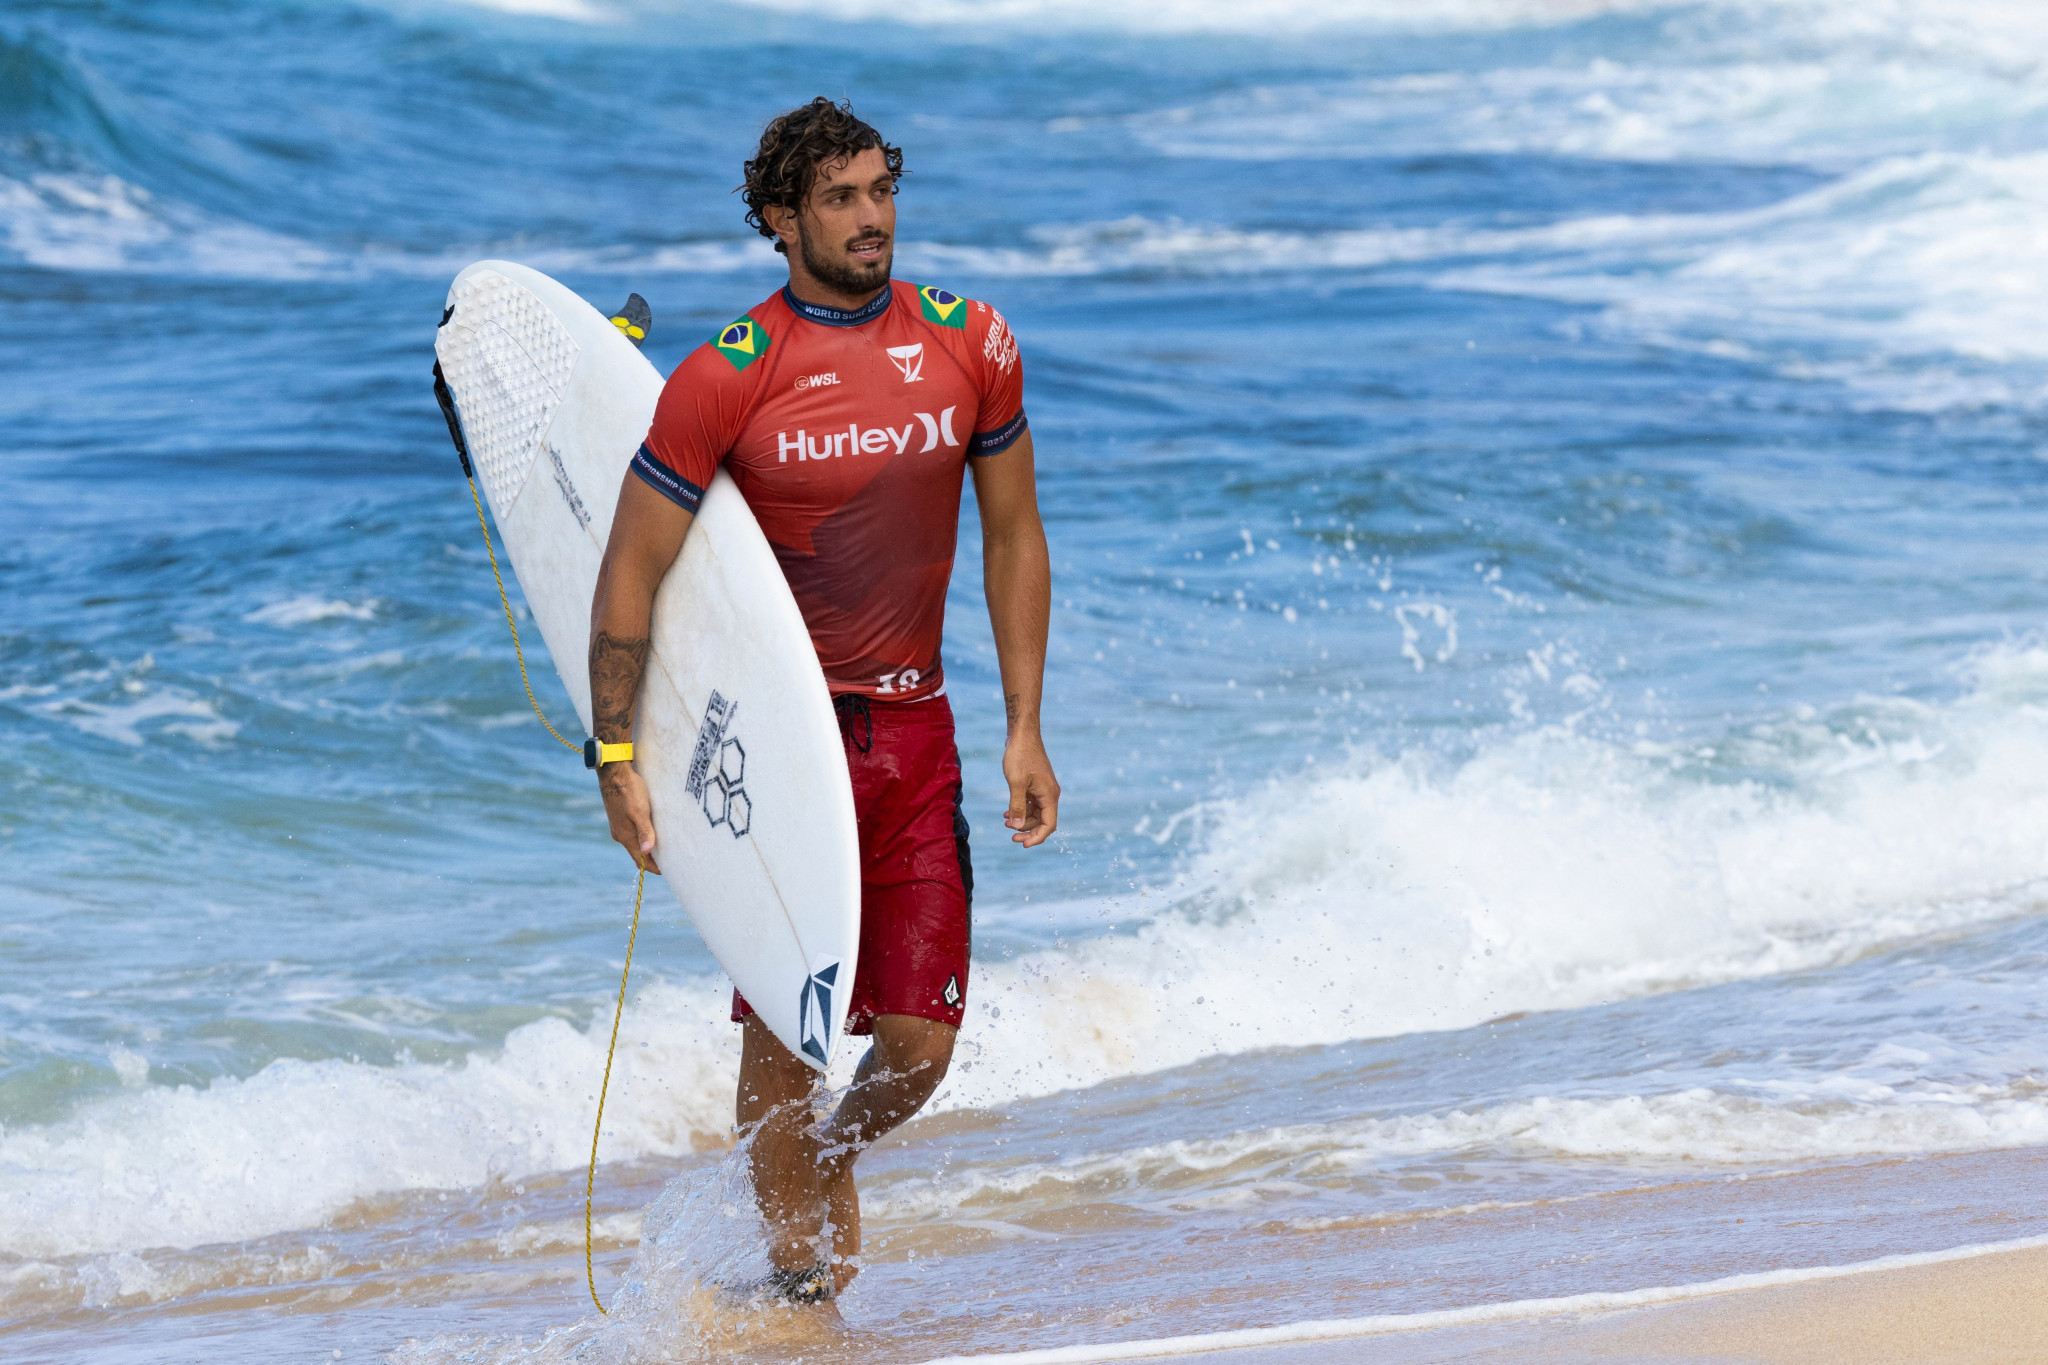 Chianca and Simmers victorious in Peniche at World Surf League